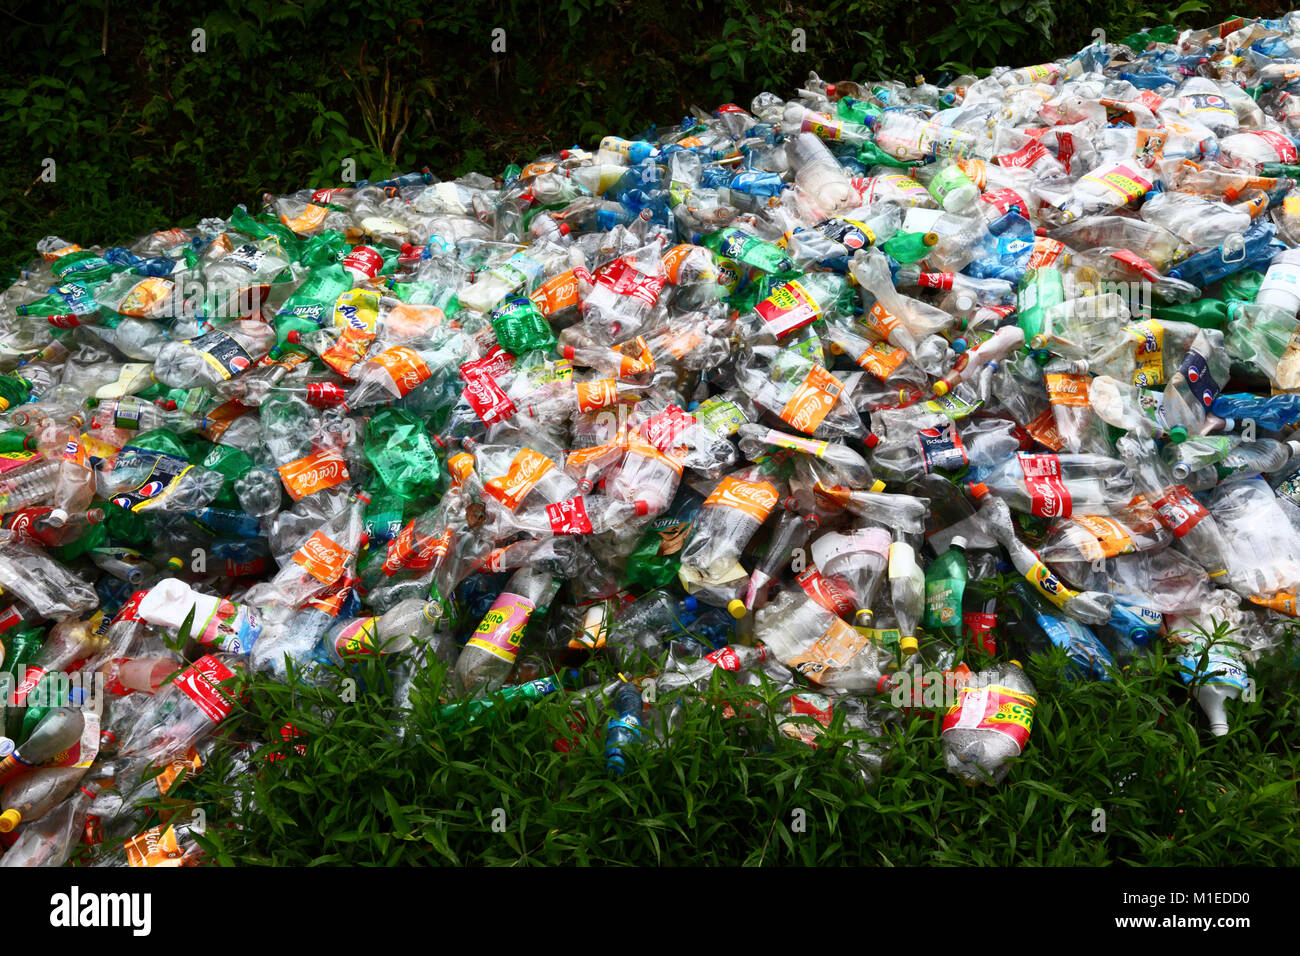 Pile of flattened Coca Cola and other plastic fizzy drink bottles dumped in vegetation Stock Photo